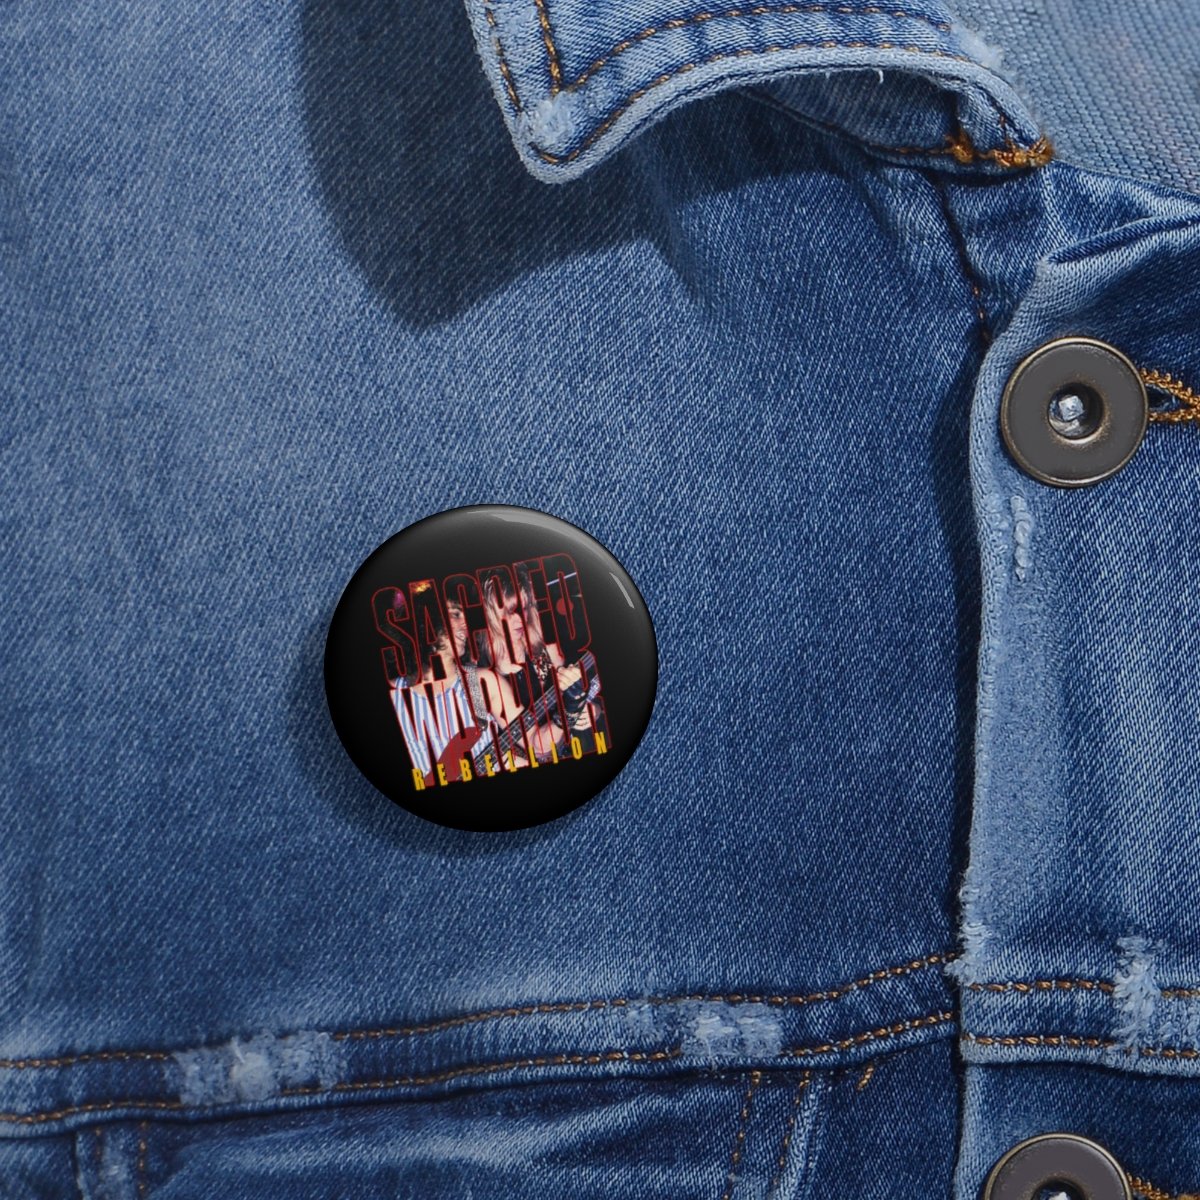 Sacred Warrior – Rebellion Pin Buttons